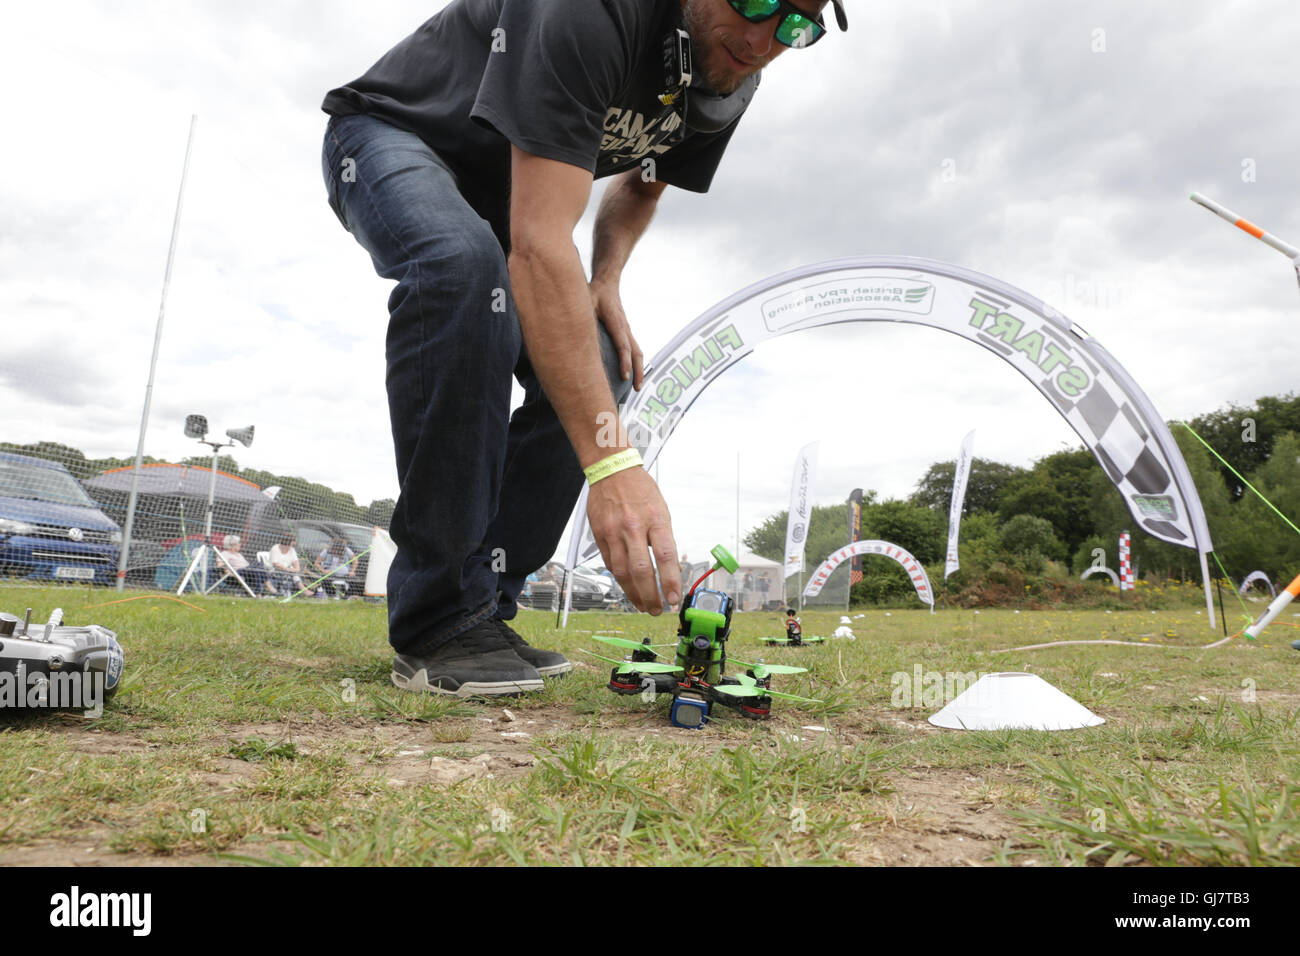 Drone Racing Queen's Cup 2016.  A drone racer pilot places a drone at thestart line prior to a race. Stock Photo